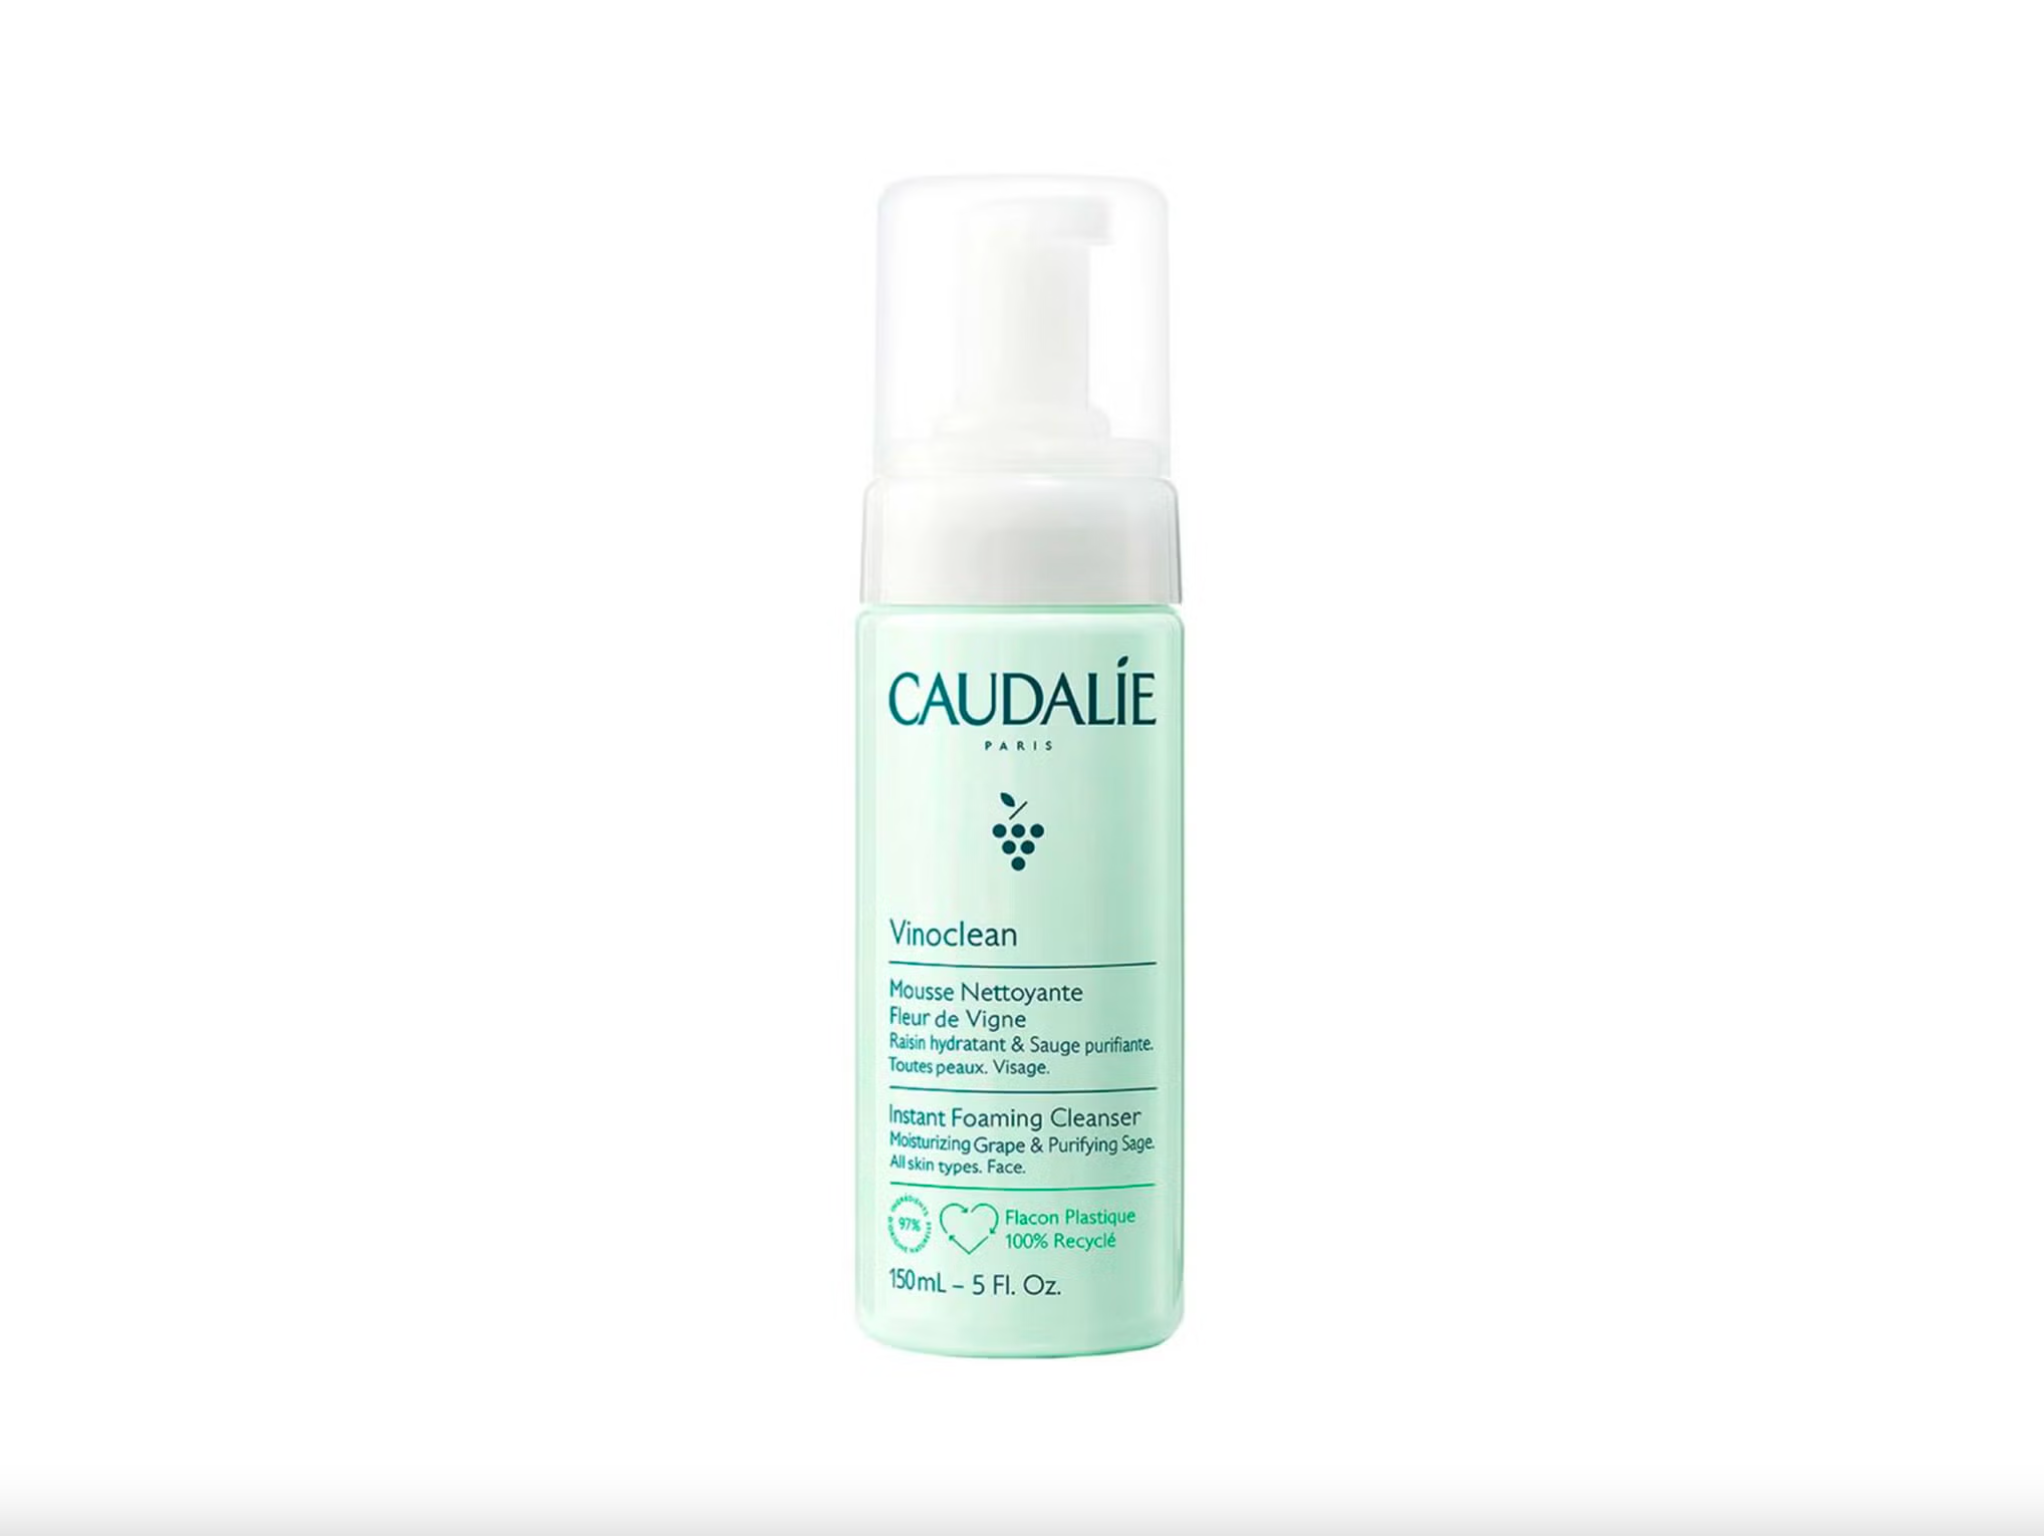 This foam cleanser is ideal for dry skin